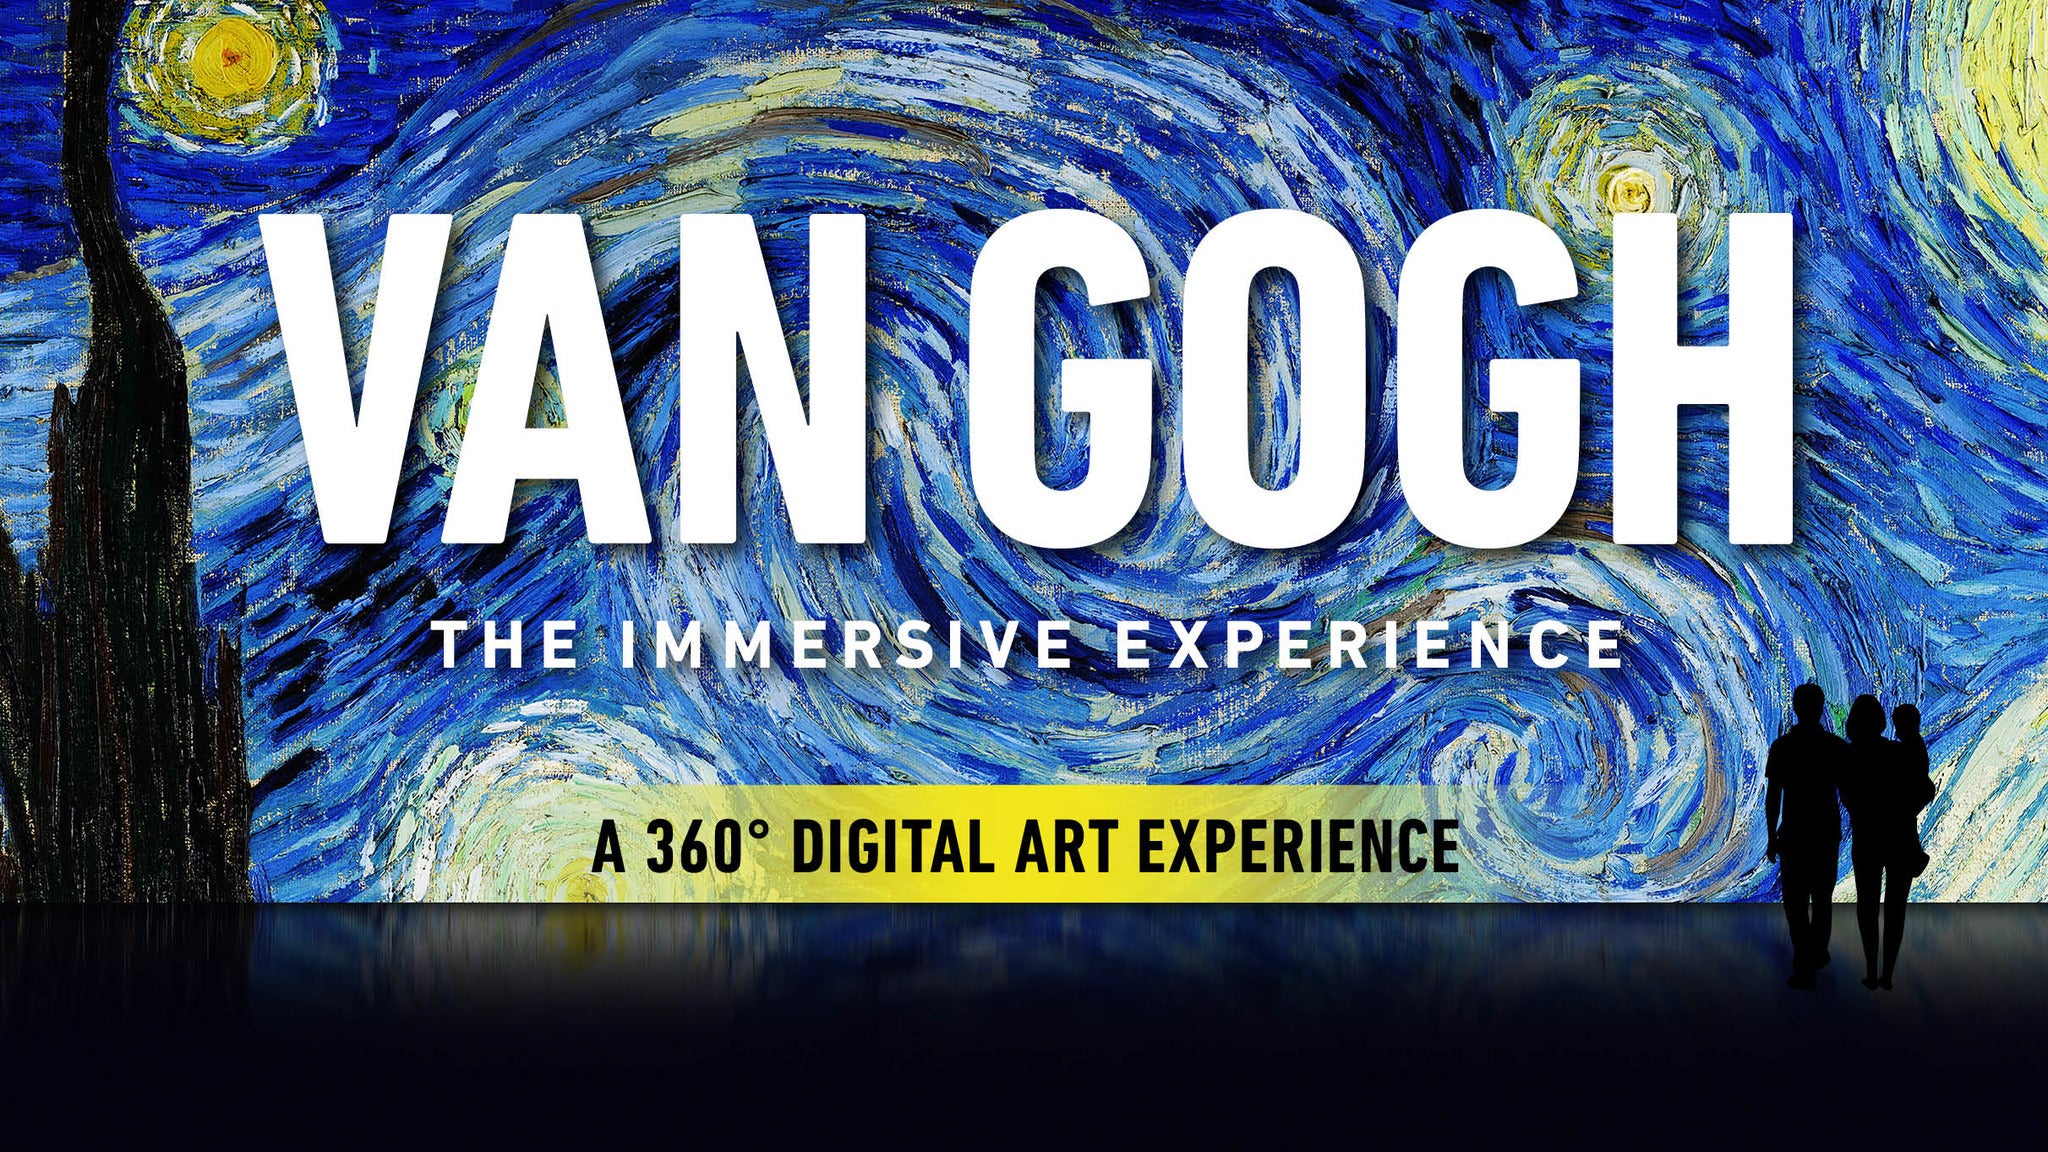 Van Gogh: the Immersive Experience (York) Event Title Pic